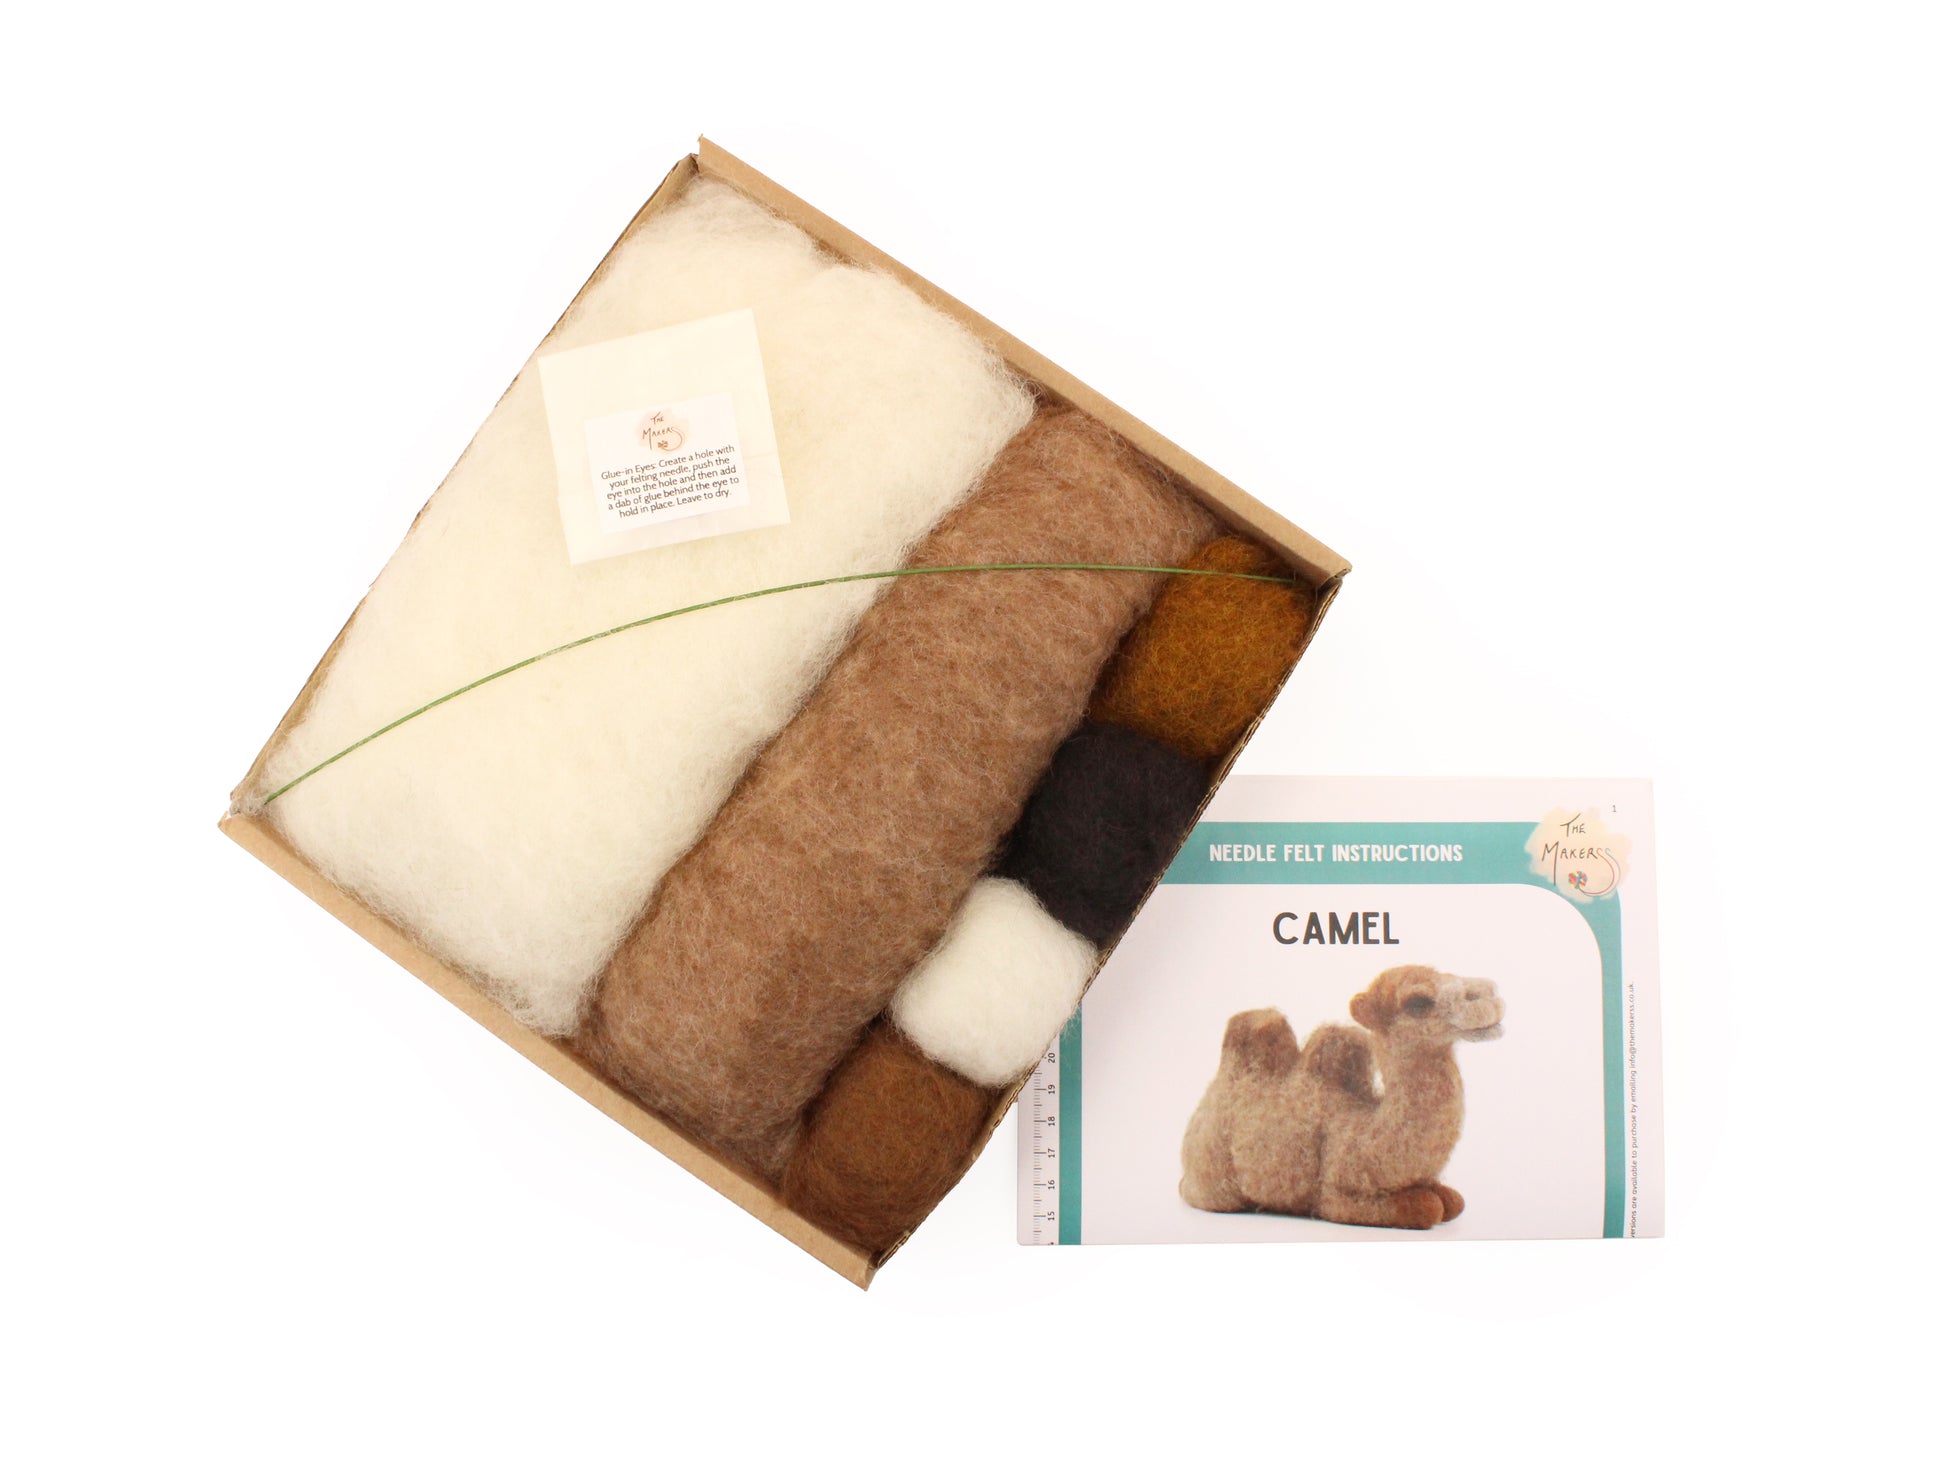 Camel Needle Felt Pack - with or without tools - The Makerss